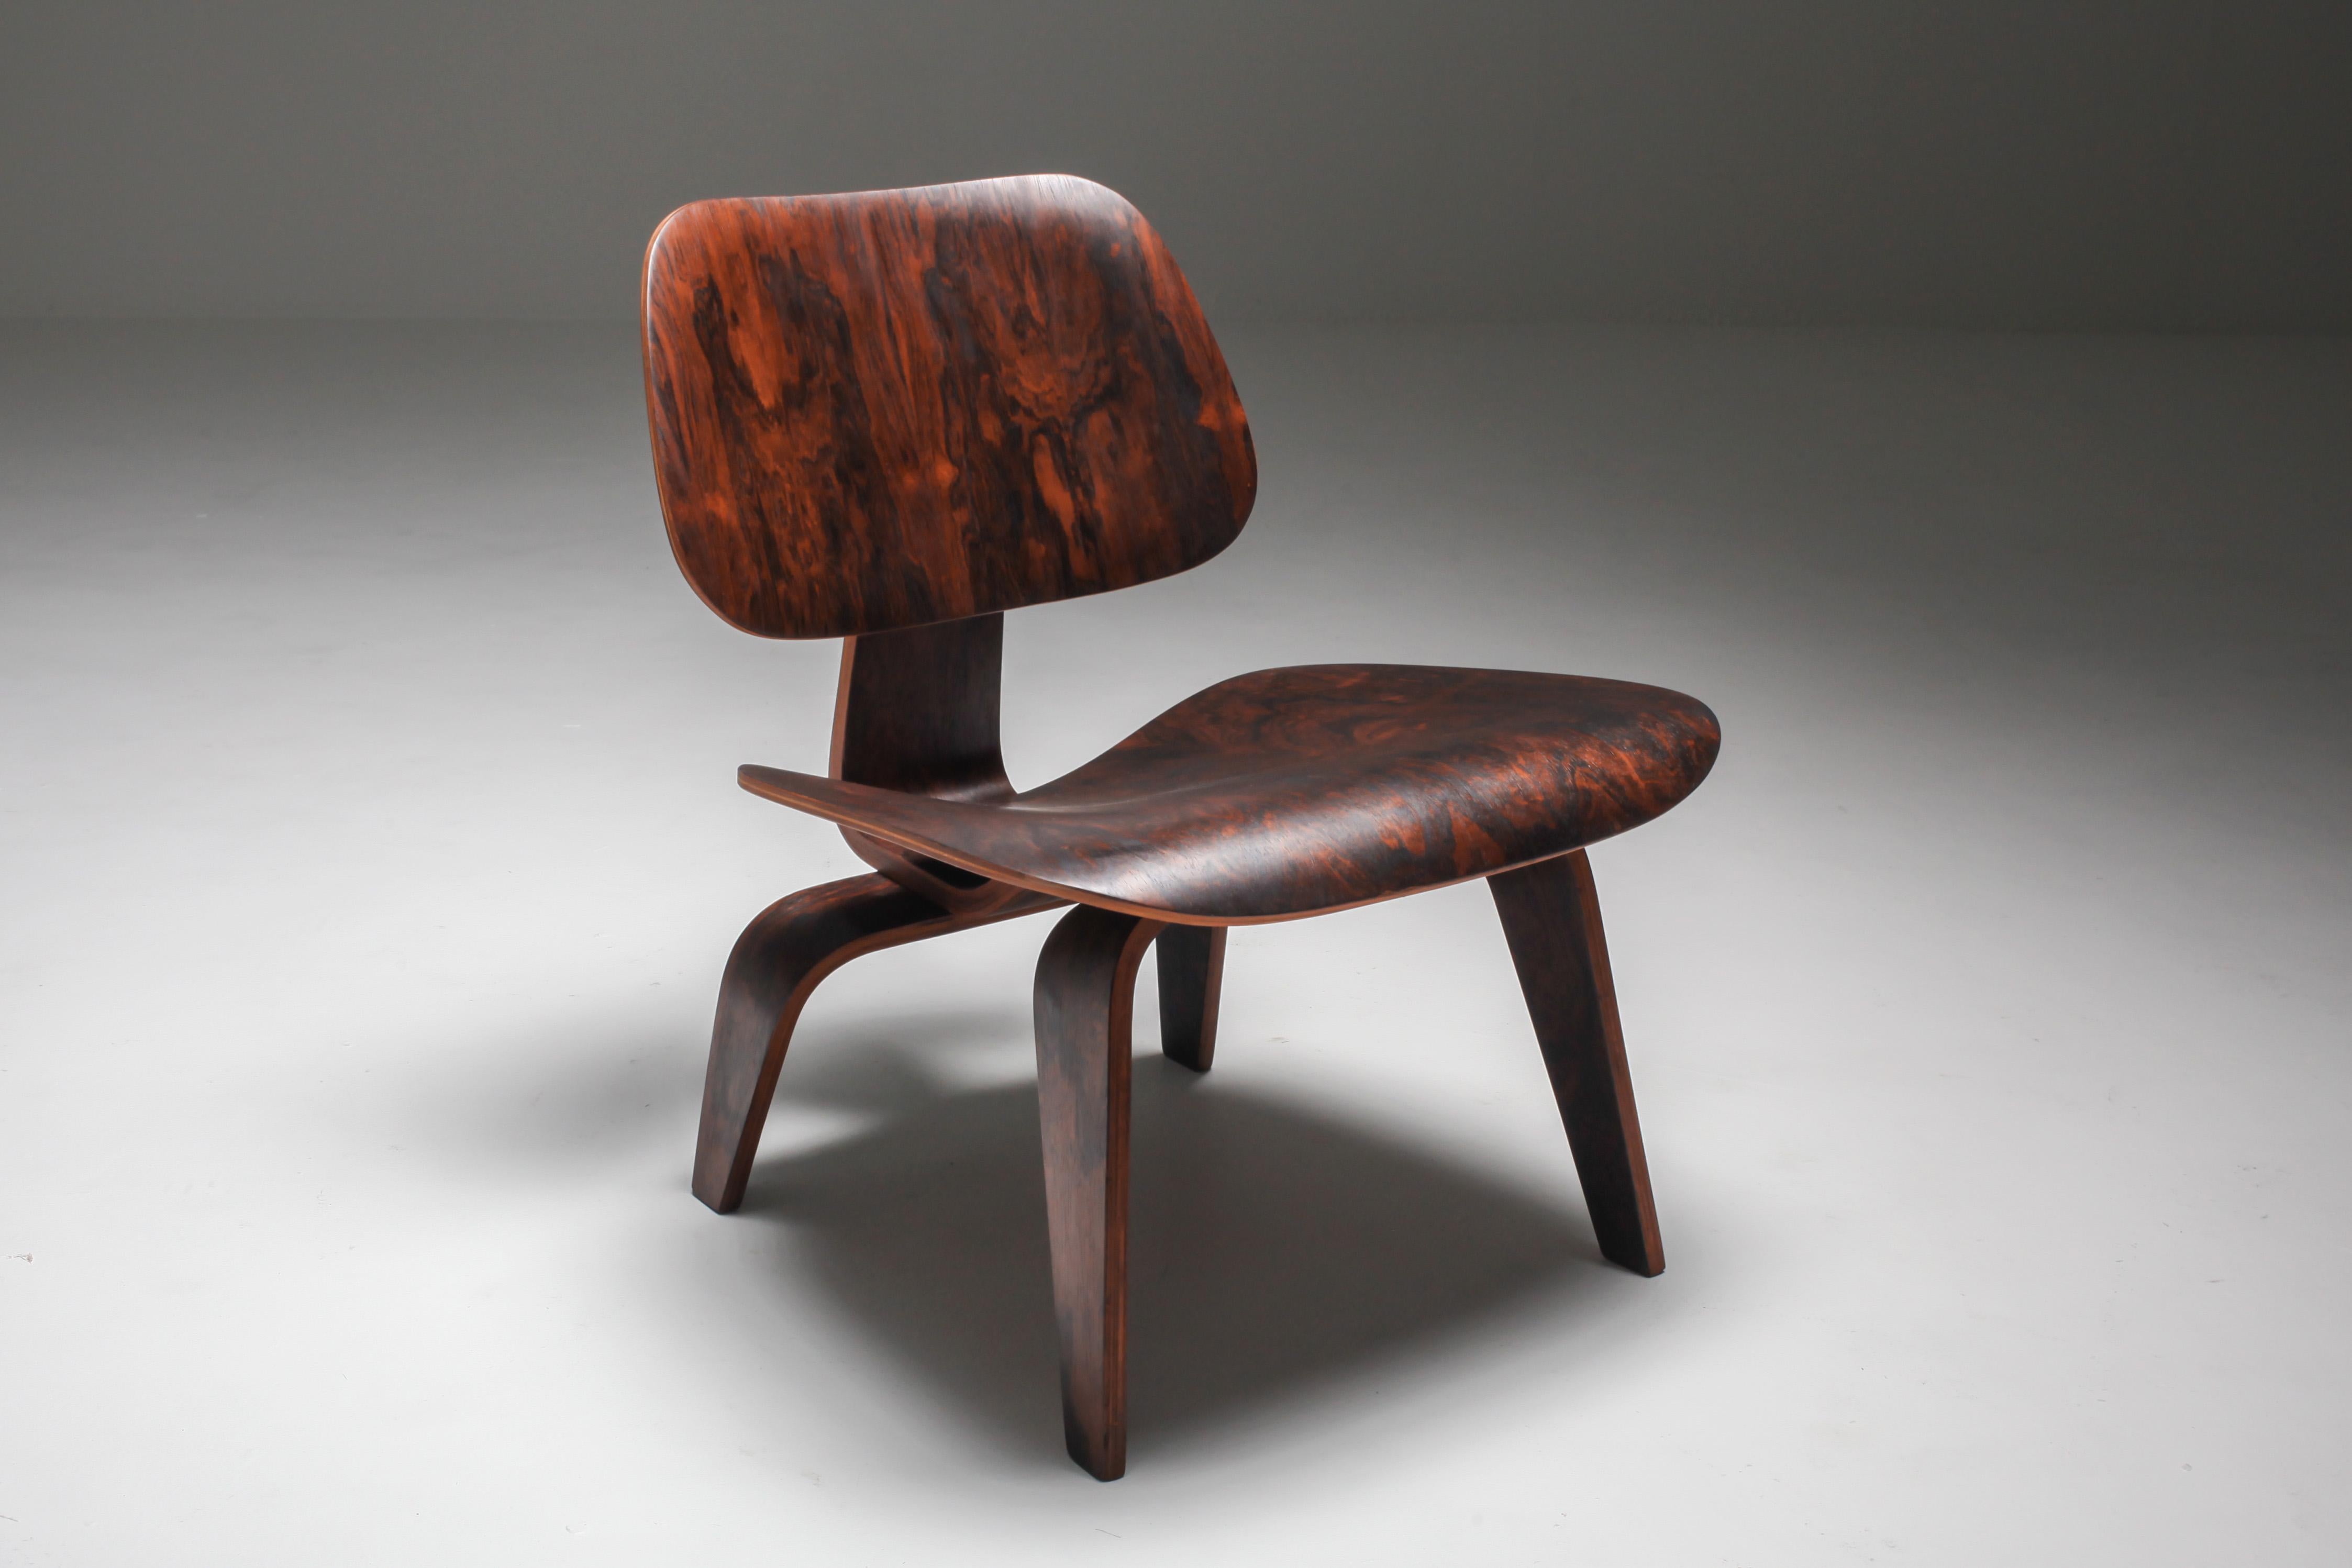 Eames LCW Pre-Production, Lounge Chair in Rio Rosewood, USA, 1945

This iconic design by Charles and Ray Eames dates from the period of their early experiments with three-dimensionally moulded plywood. A true important authentic and historic piece